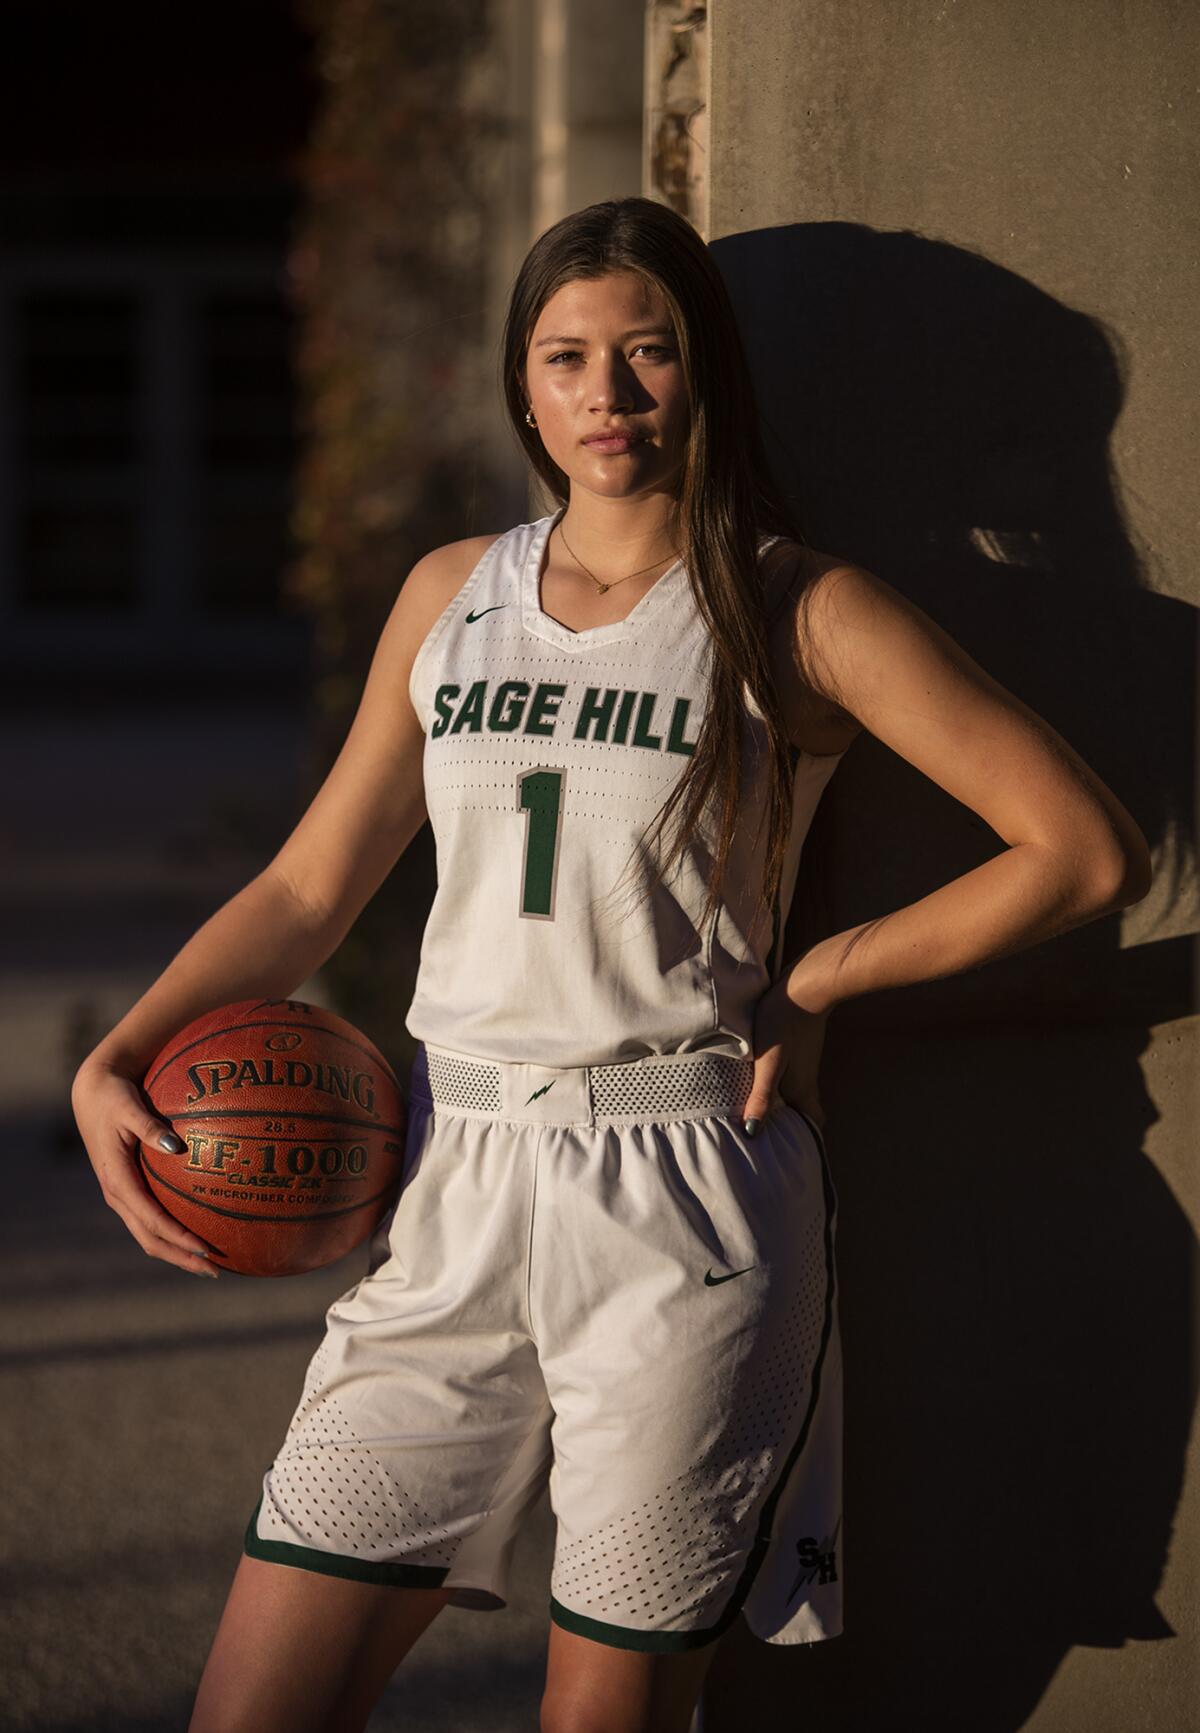 Sage Hill's Emily Elliott scored 31 points to go with 22 rebounds in a 62-57 win over Oceanside El Camino in the SoCal Holiday Prep Classic NAIA Division title game in San Diego on Dec. 30.